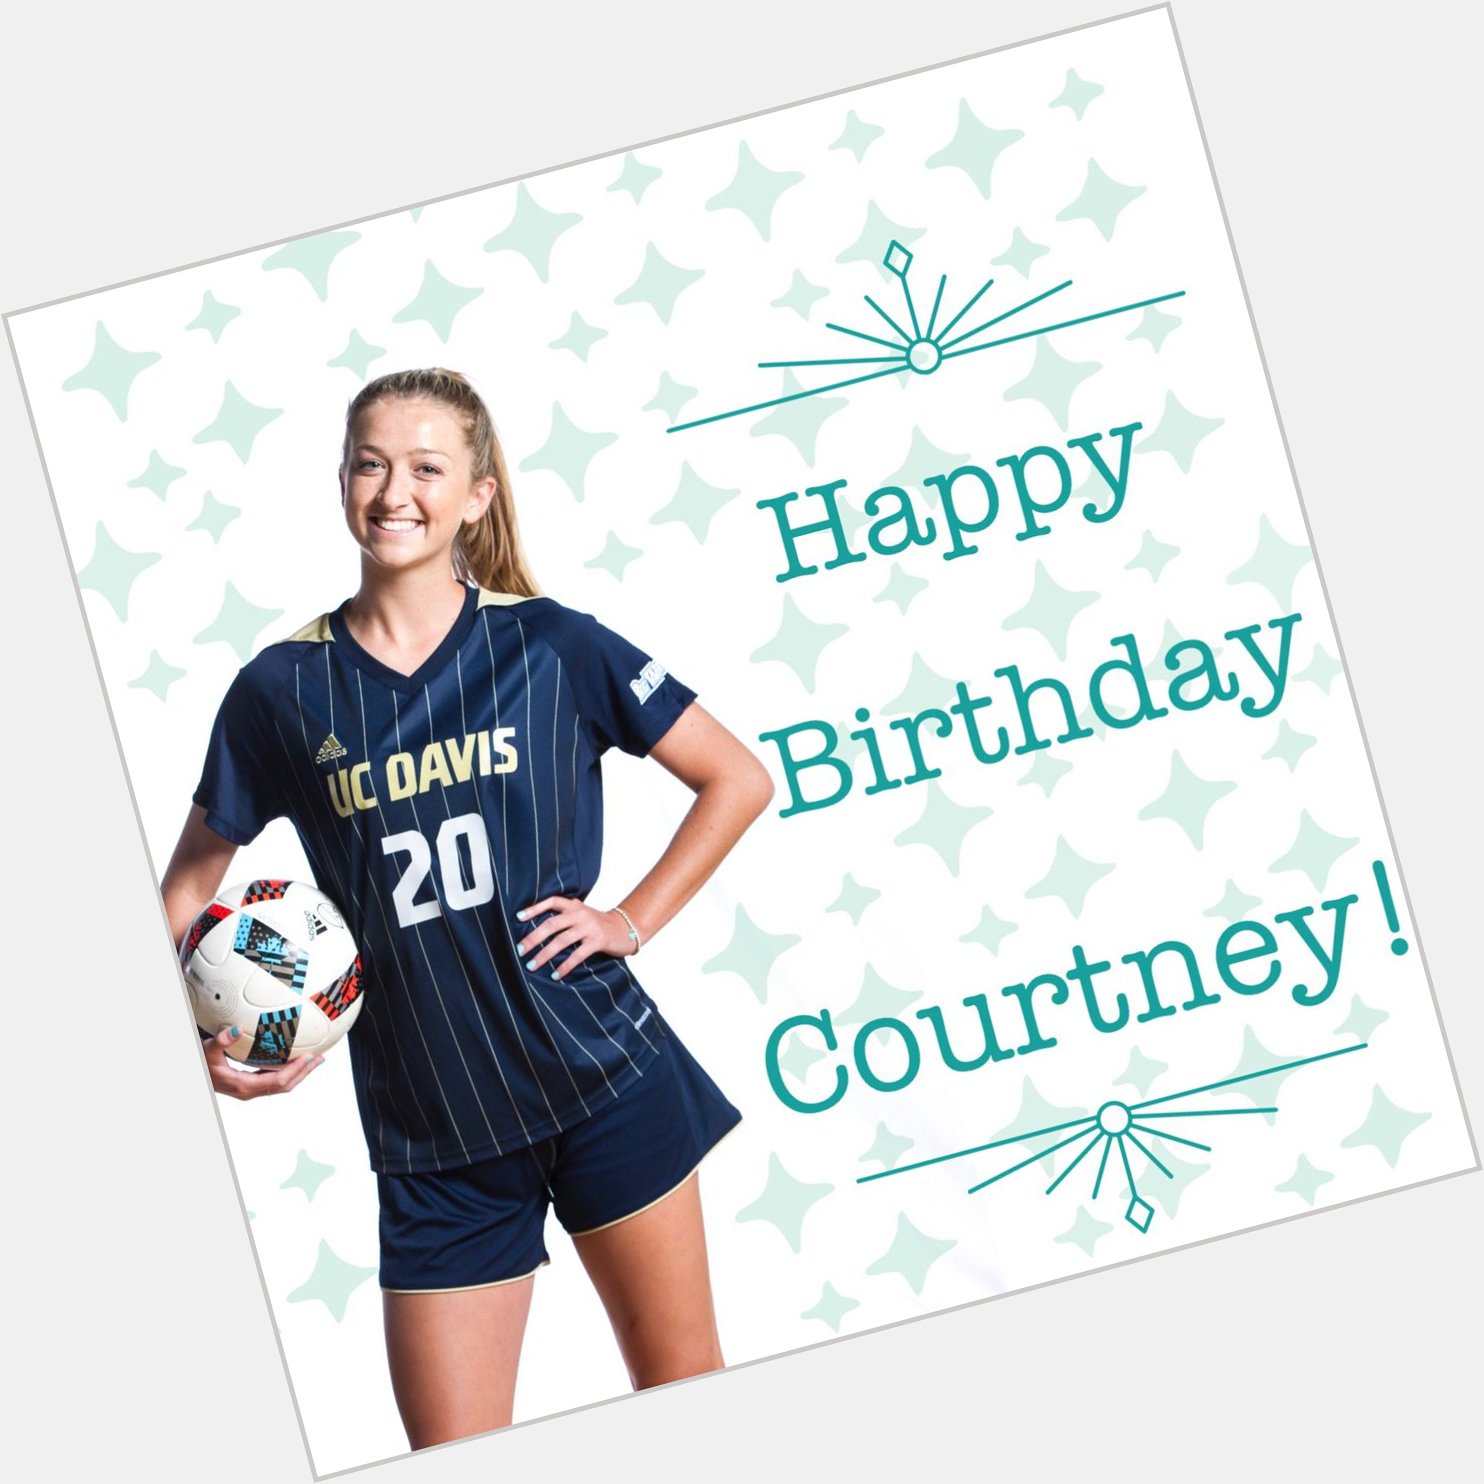 Happy Birthday Courtney!!! Hope you have a wonderful day!   